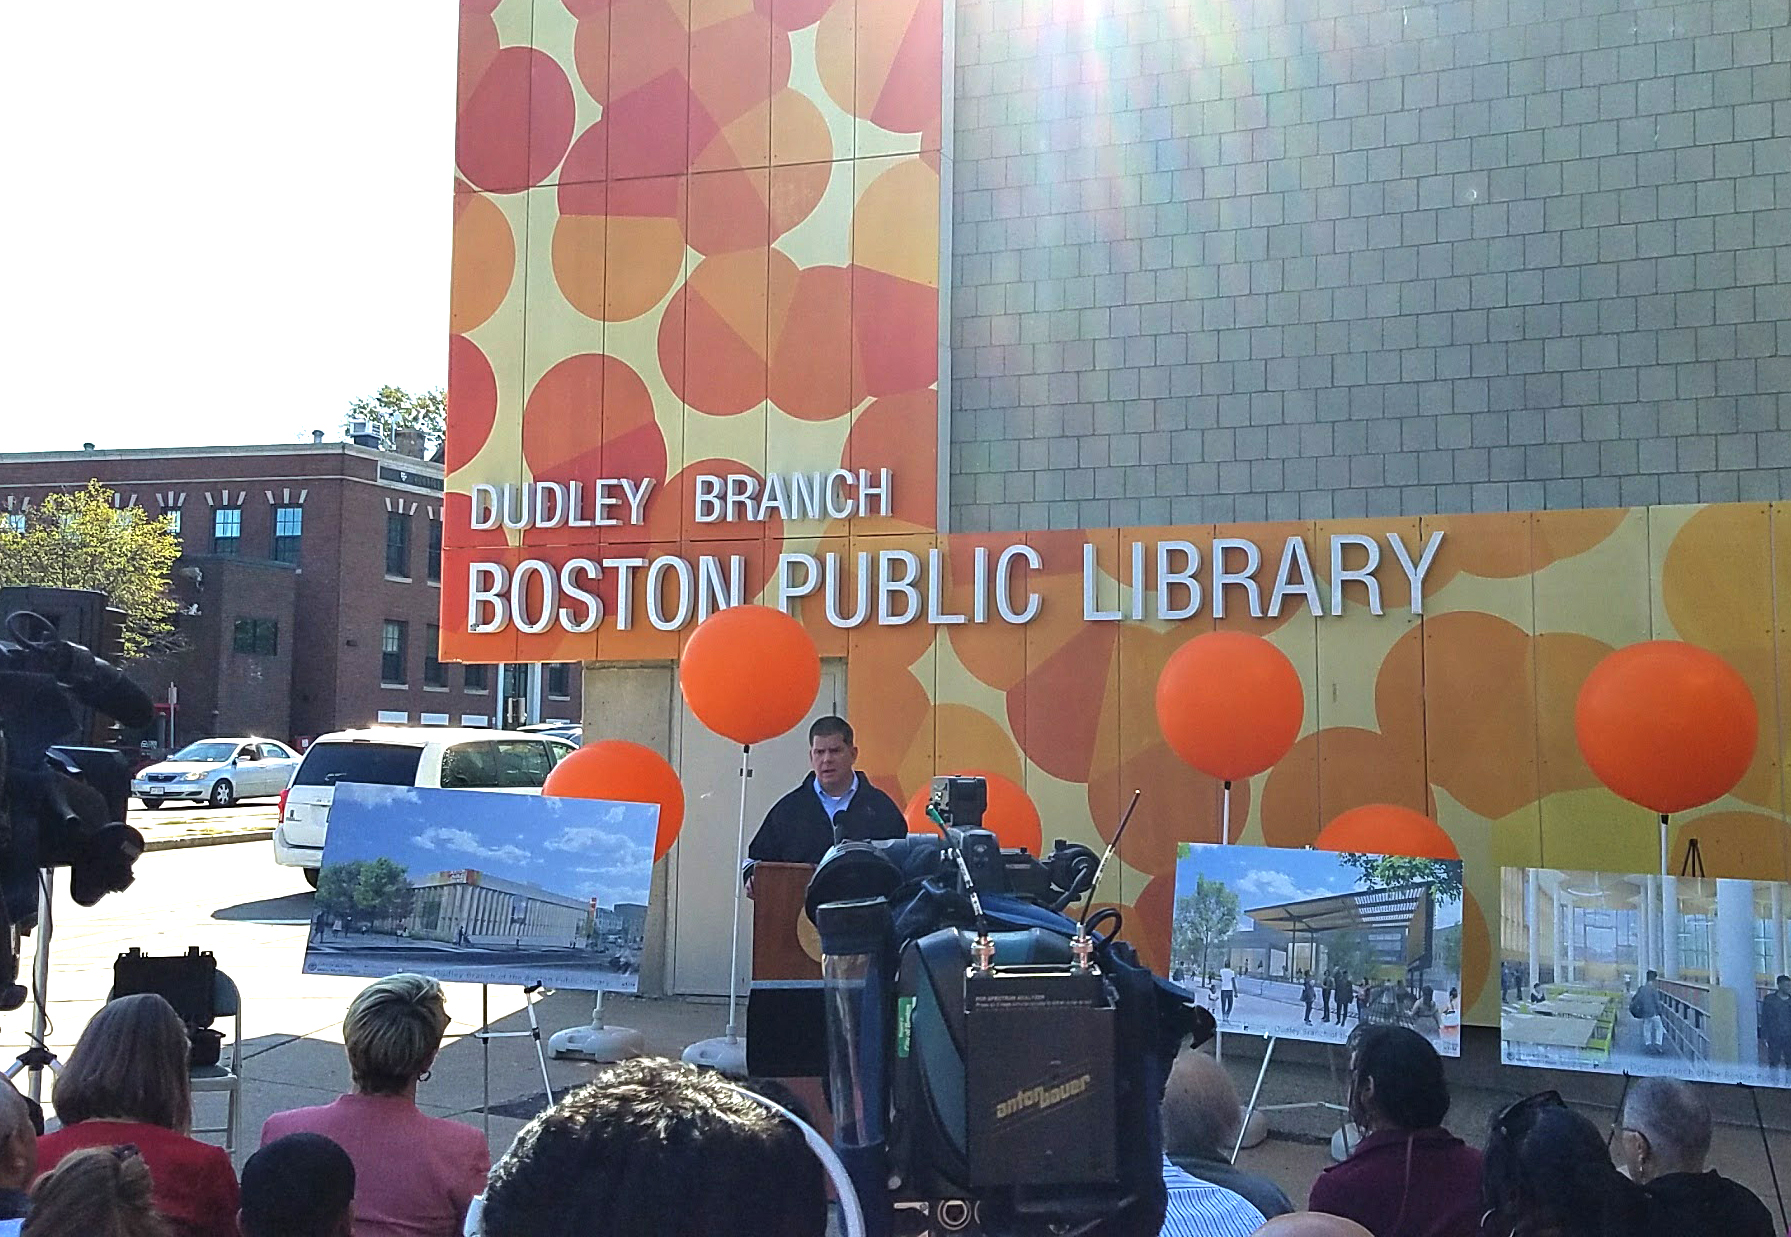 Renovations to begin at the Dudley Branch of the Boston Public Library